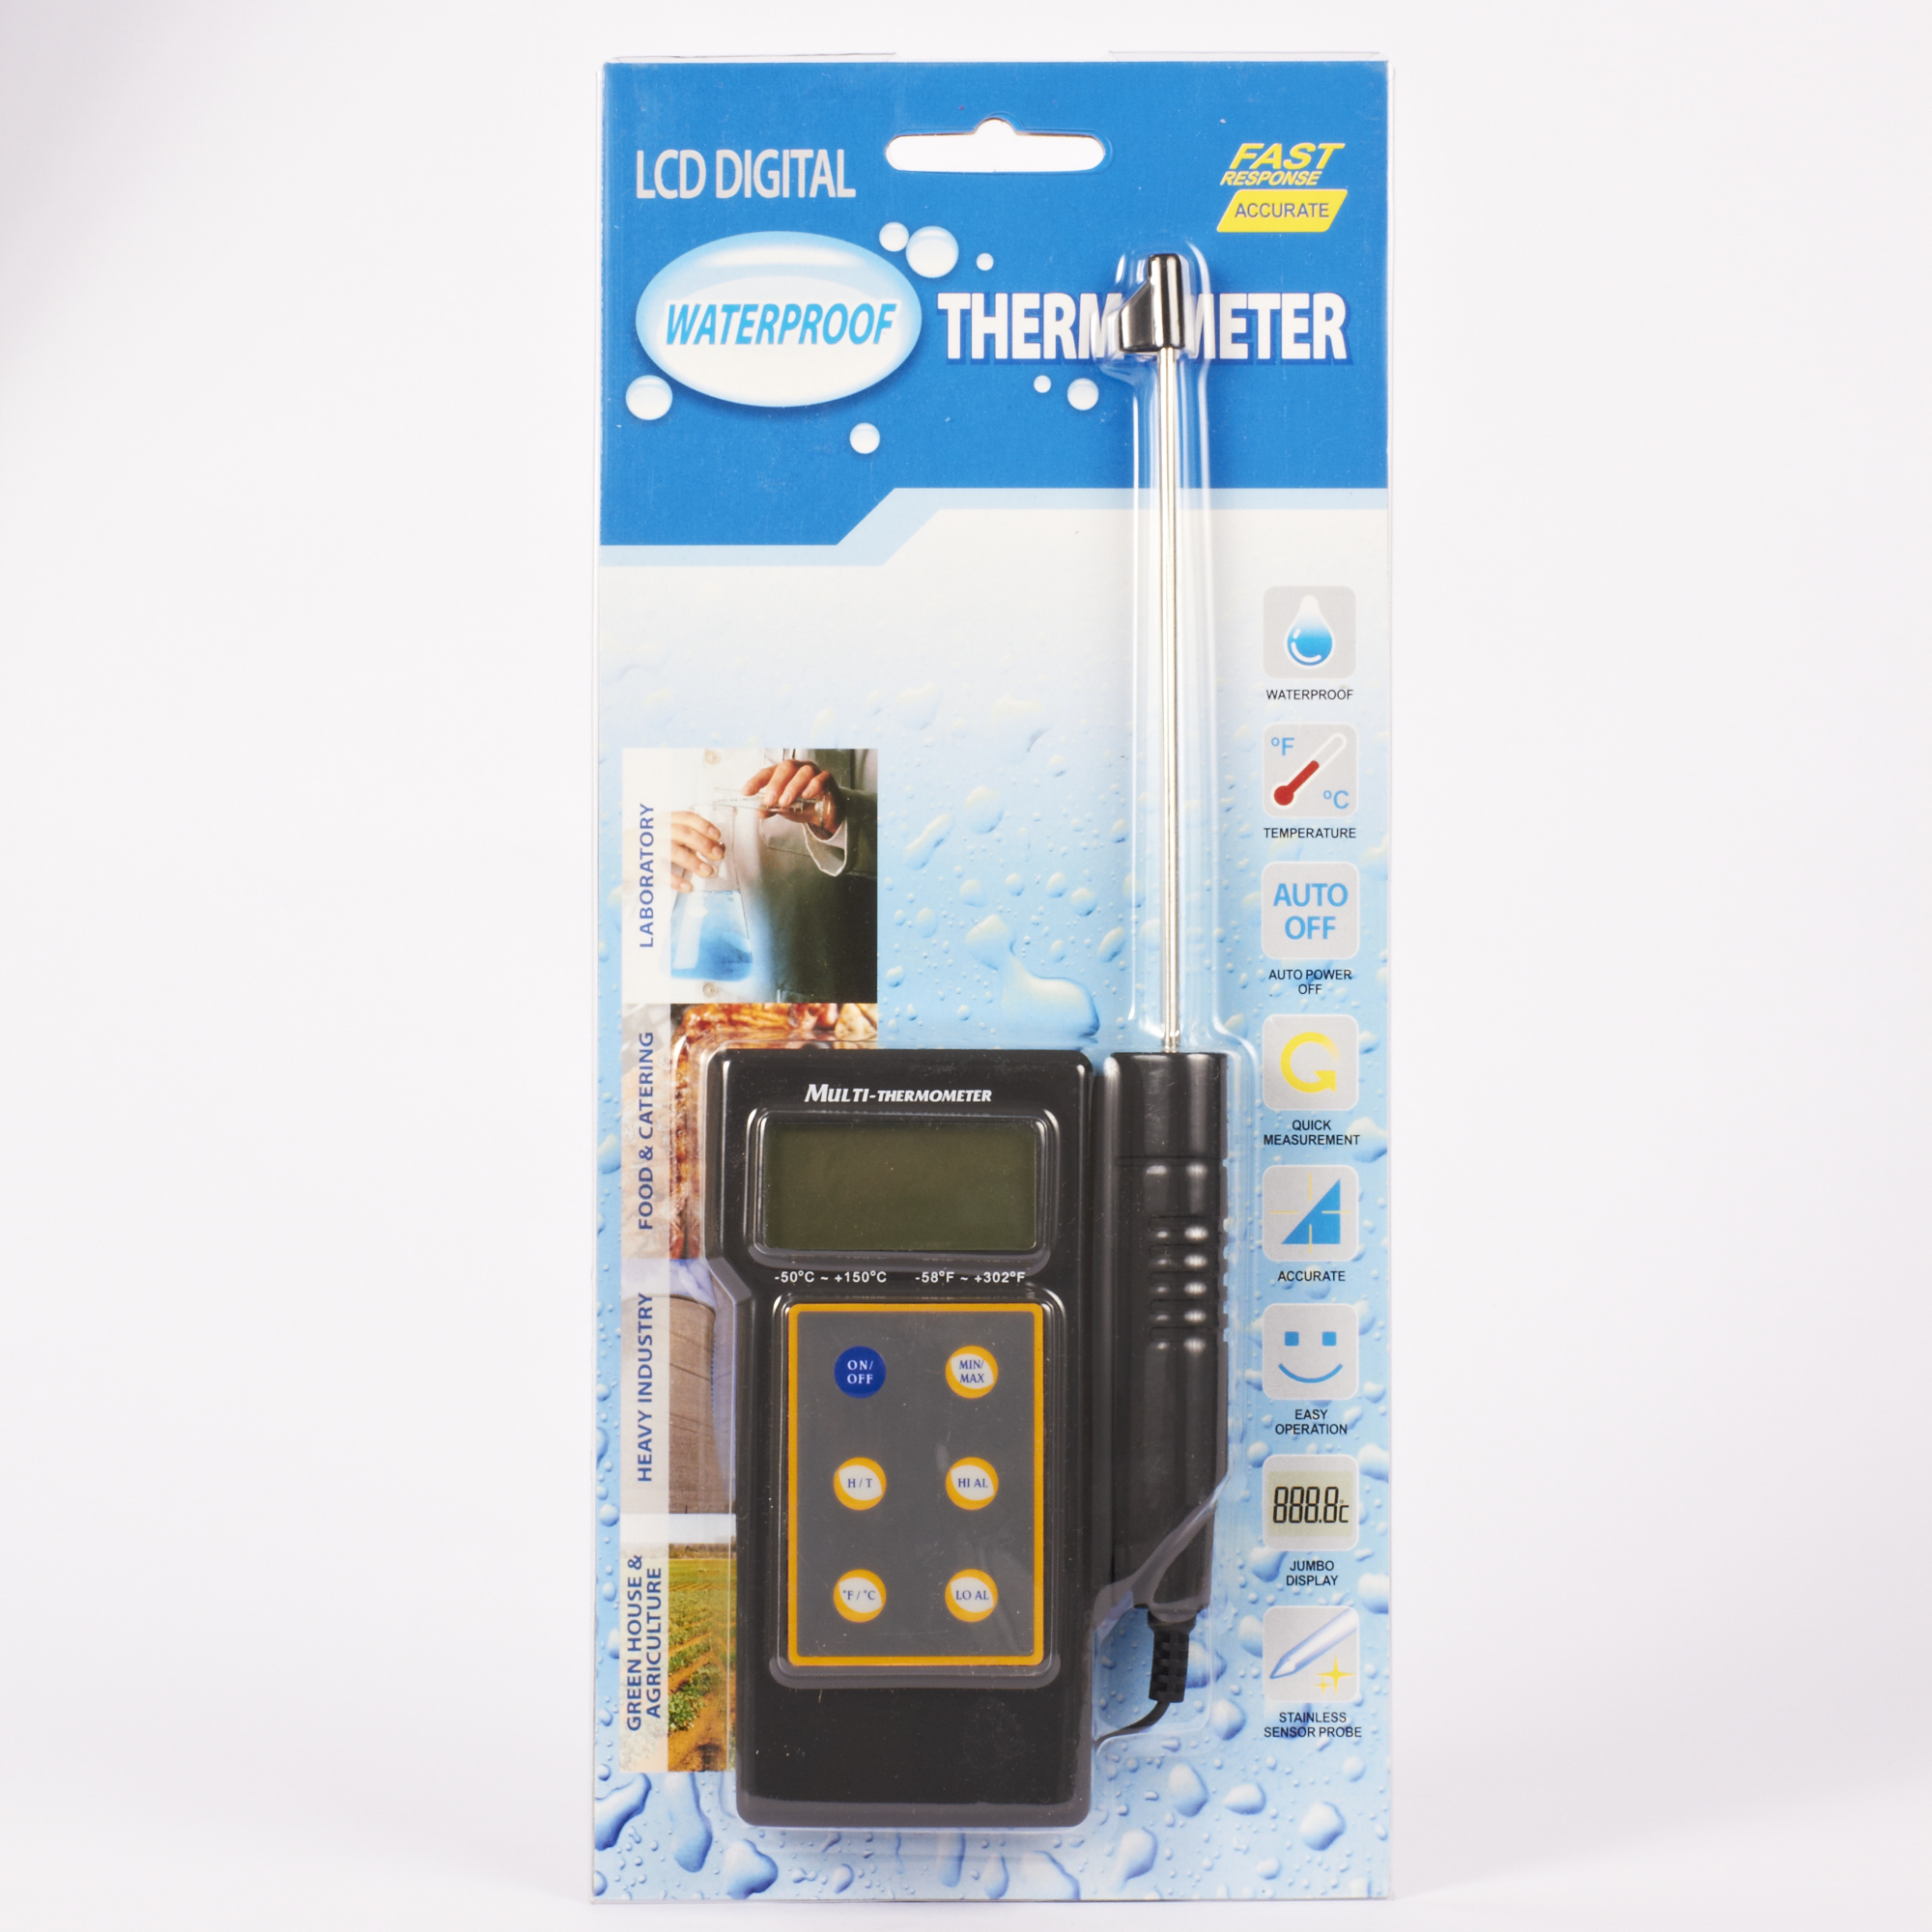 FULL UKAS Calibrated Hand Held Black Waterproof Thermometer With Calibration Cert (SPO Delivery  Approx. 2 Weeks)